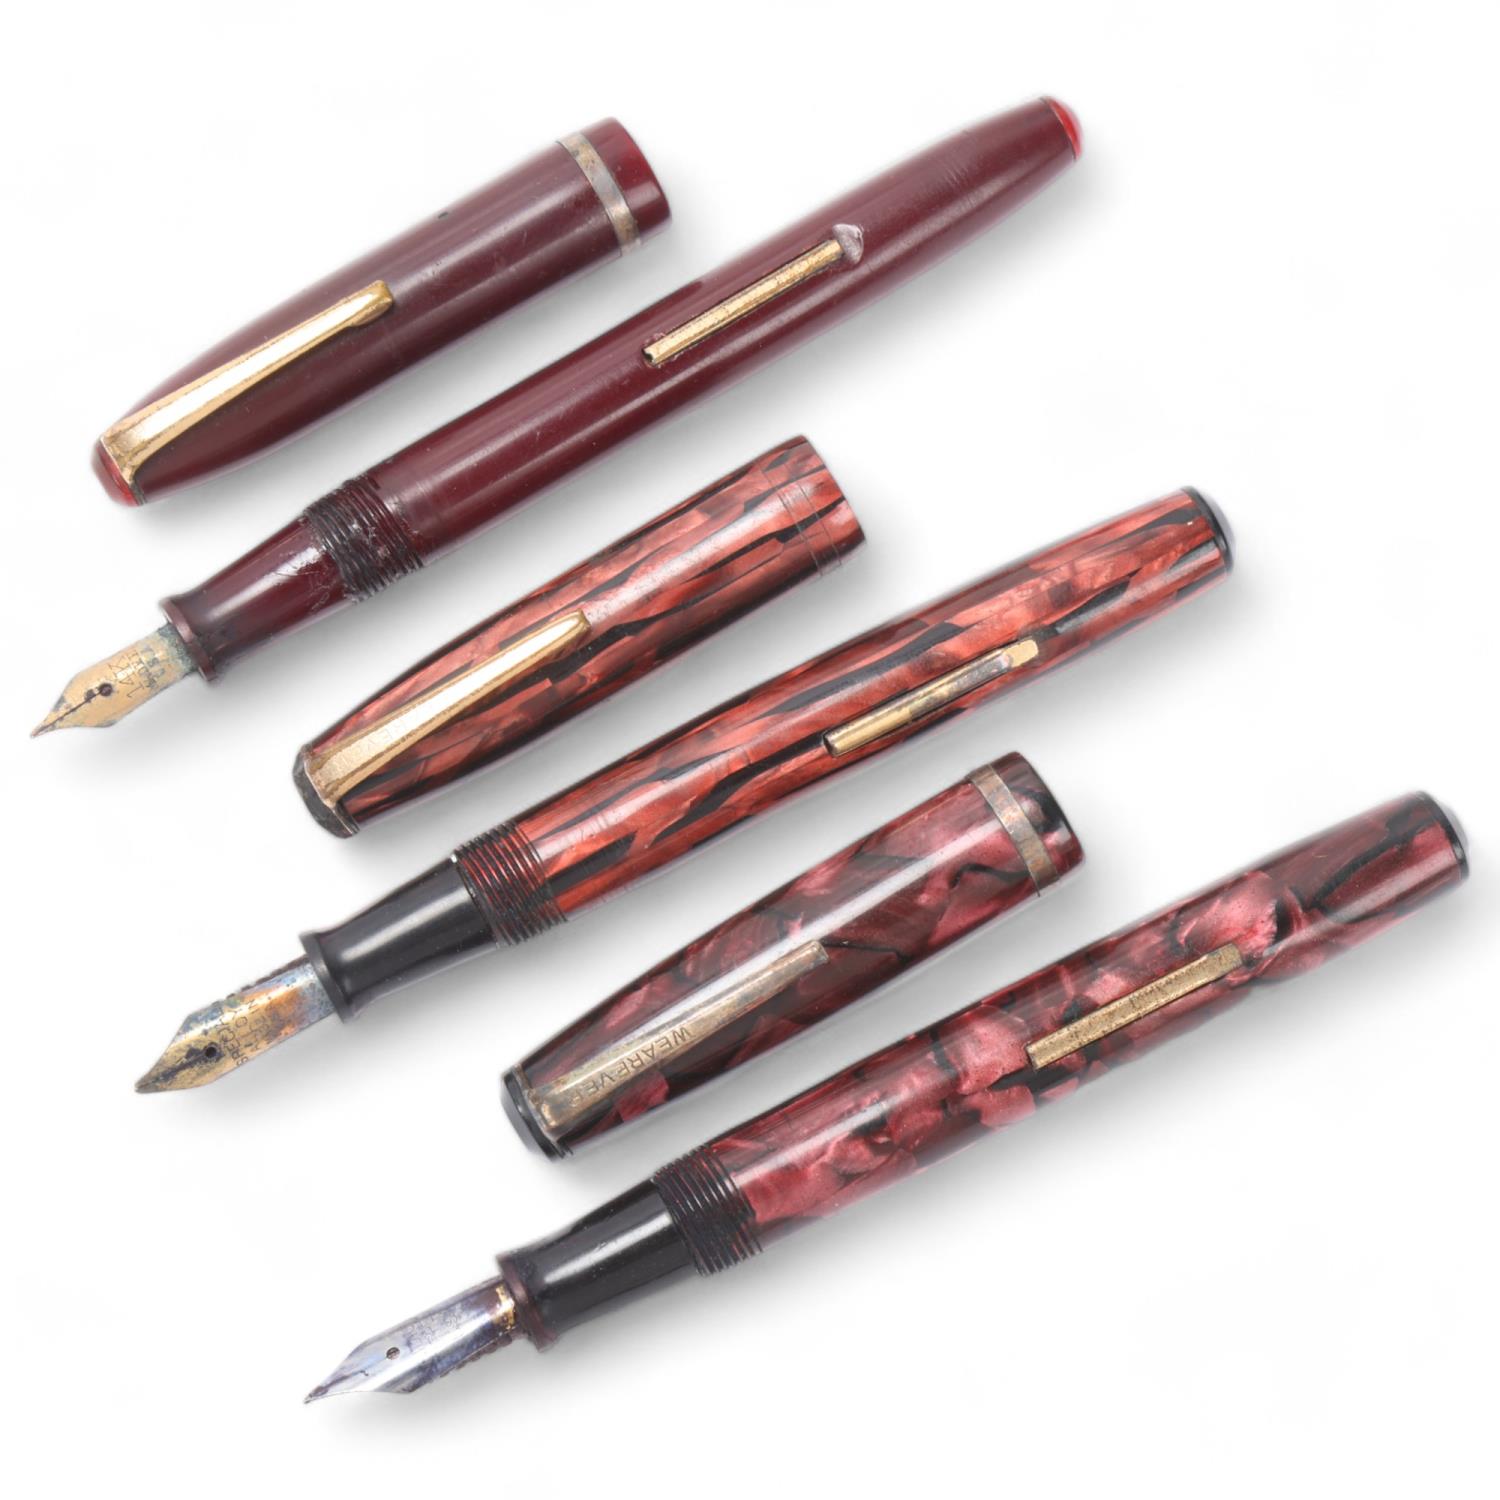 3 vintage Wearever, USA, lever fill fountain pens, circa 1940s' Marbled pens in complete untested